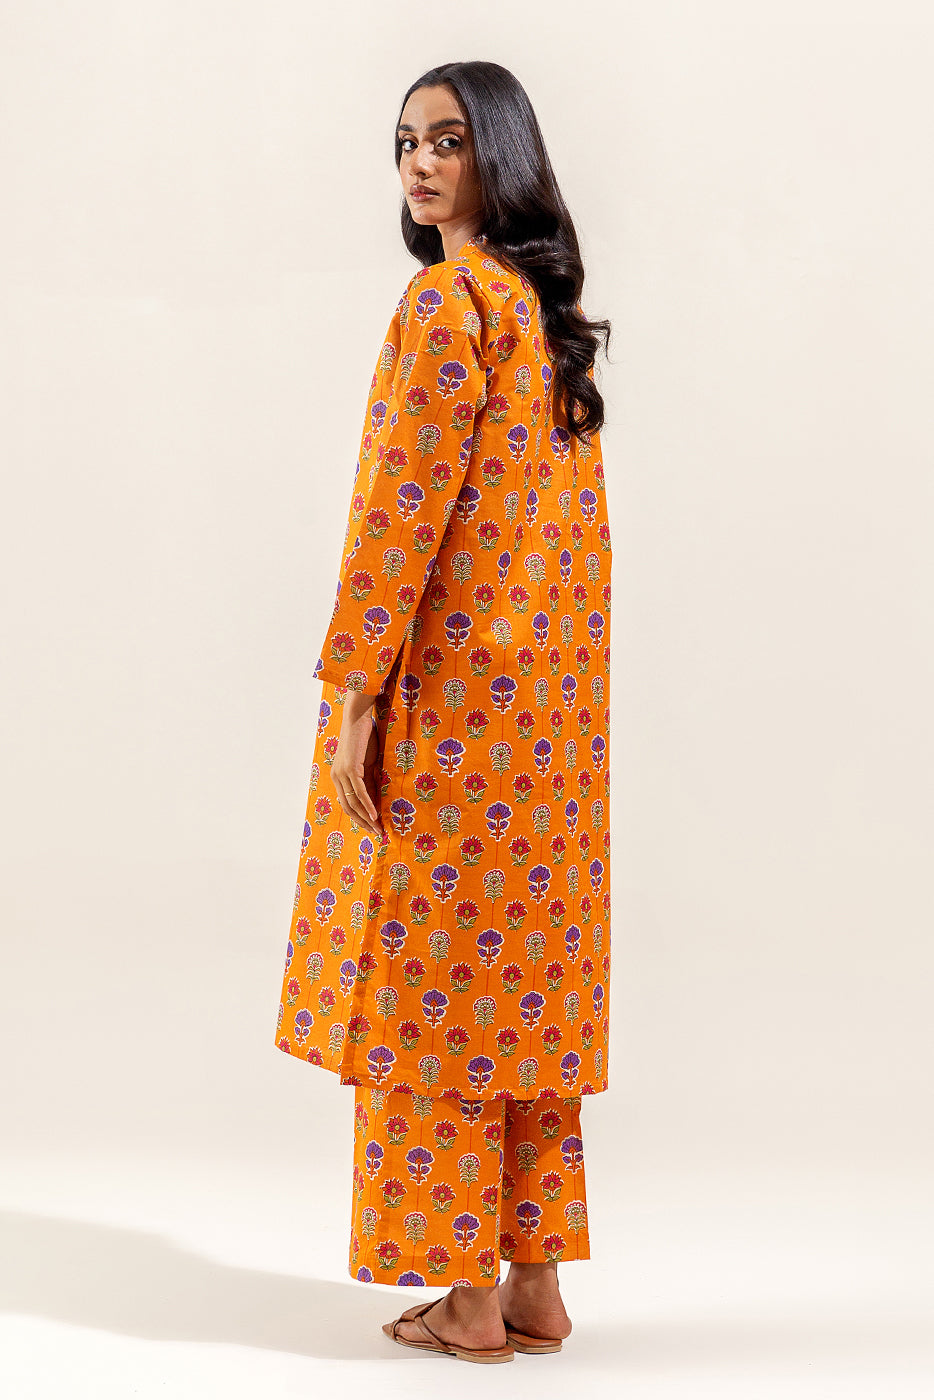 2 PIECE PRINTED SUIT-OCRE BLOOM (UNSTITCHED)